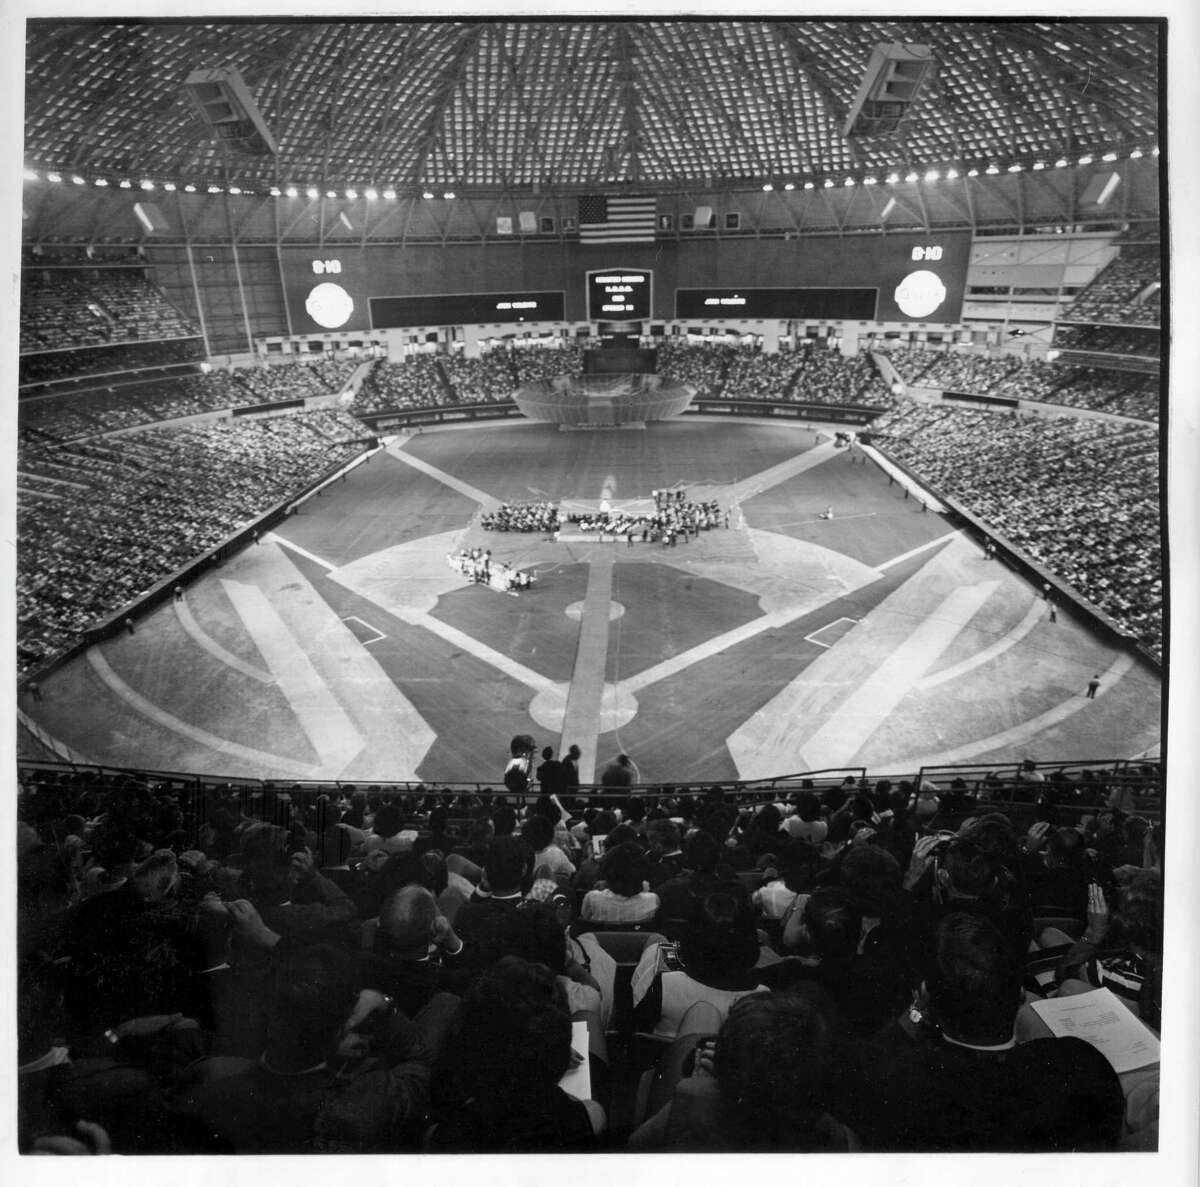 1989 NBA All-Star Game at Houston's Astrodome